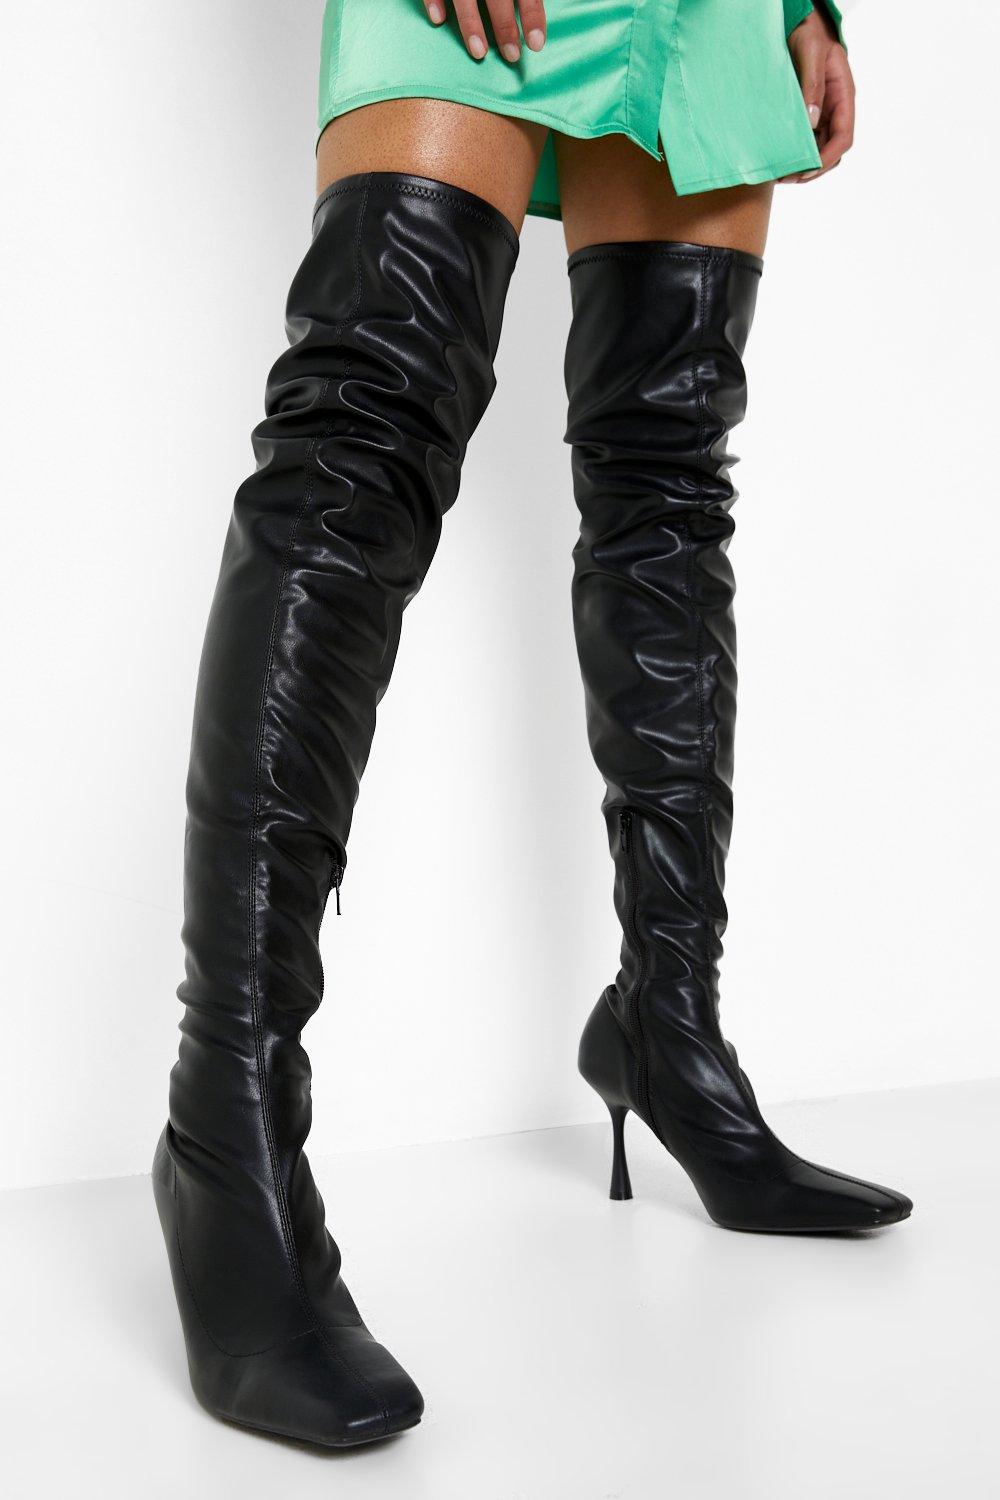 Boohoo Over The Knee Boots Pointed Stiletto Boots- Black  - Size: 7